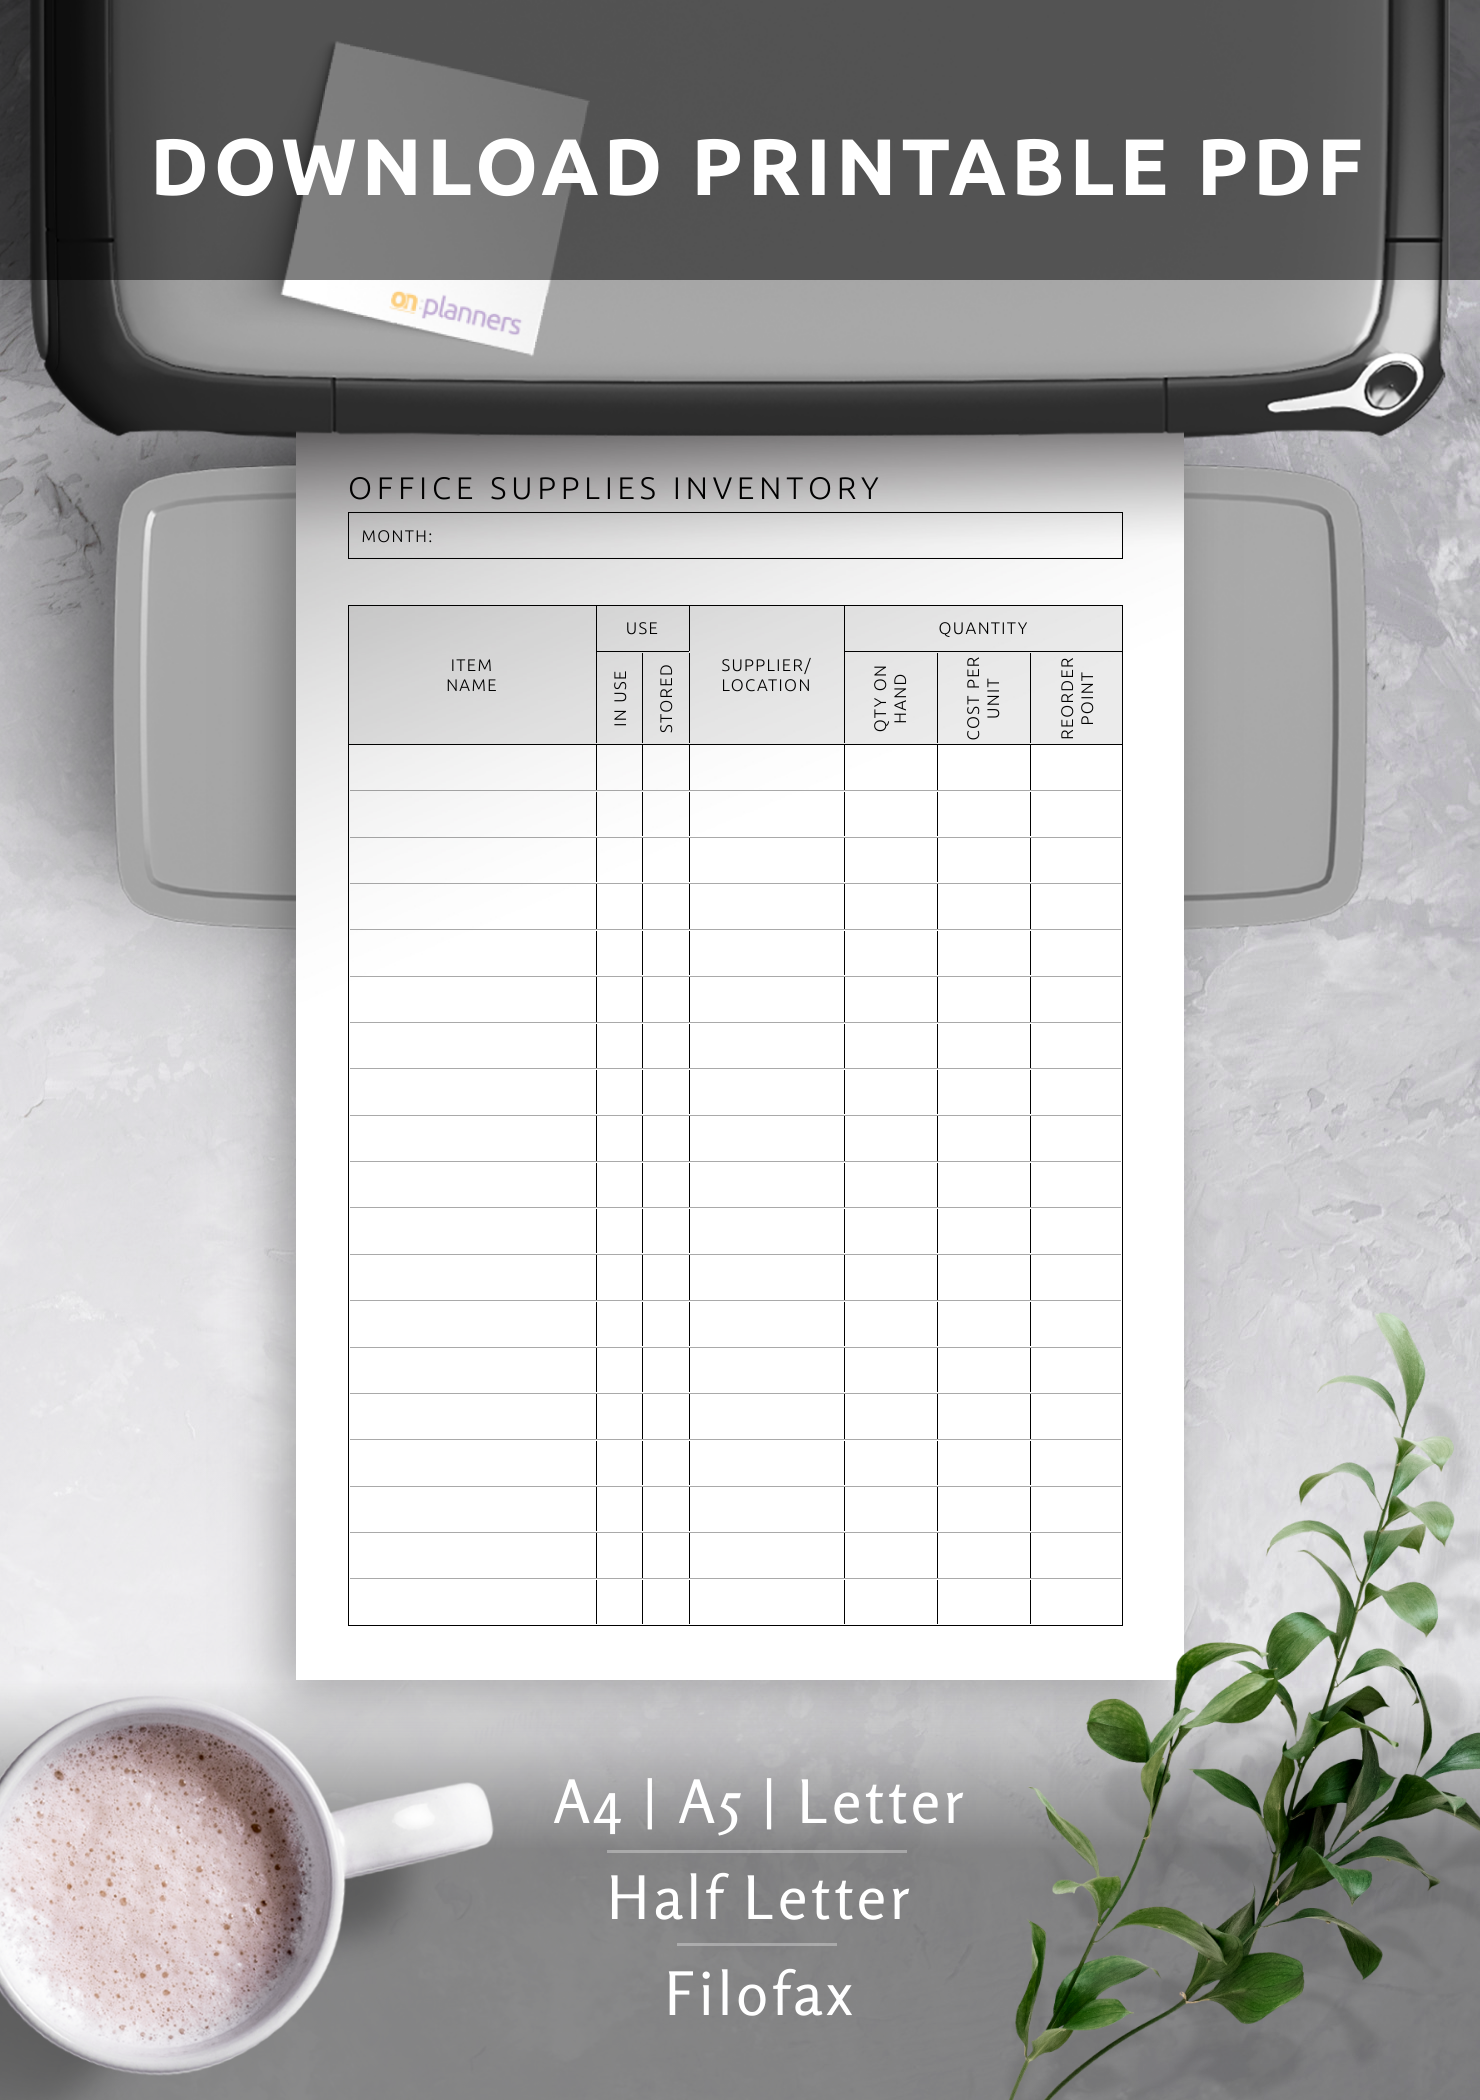 https://onplanners.com/sites/default/files/styles/template_fancy/public/template-images/printable-office-supplies-inventory-template-template1.png